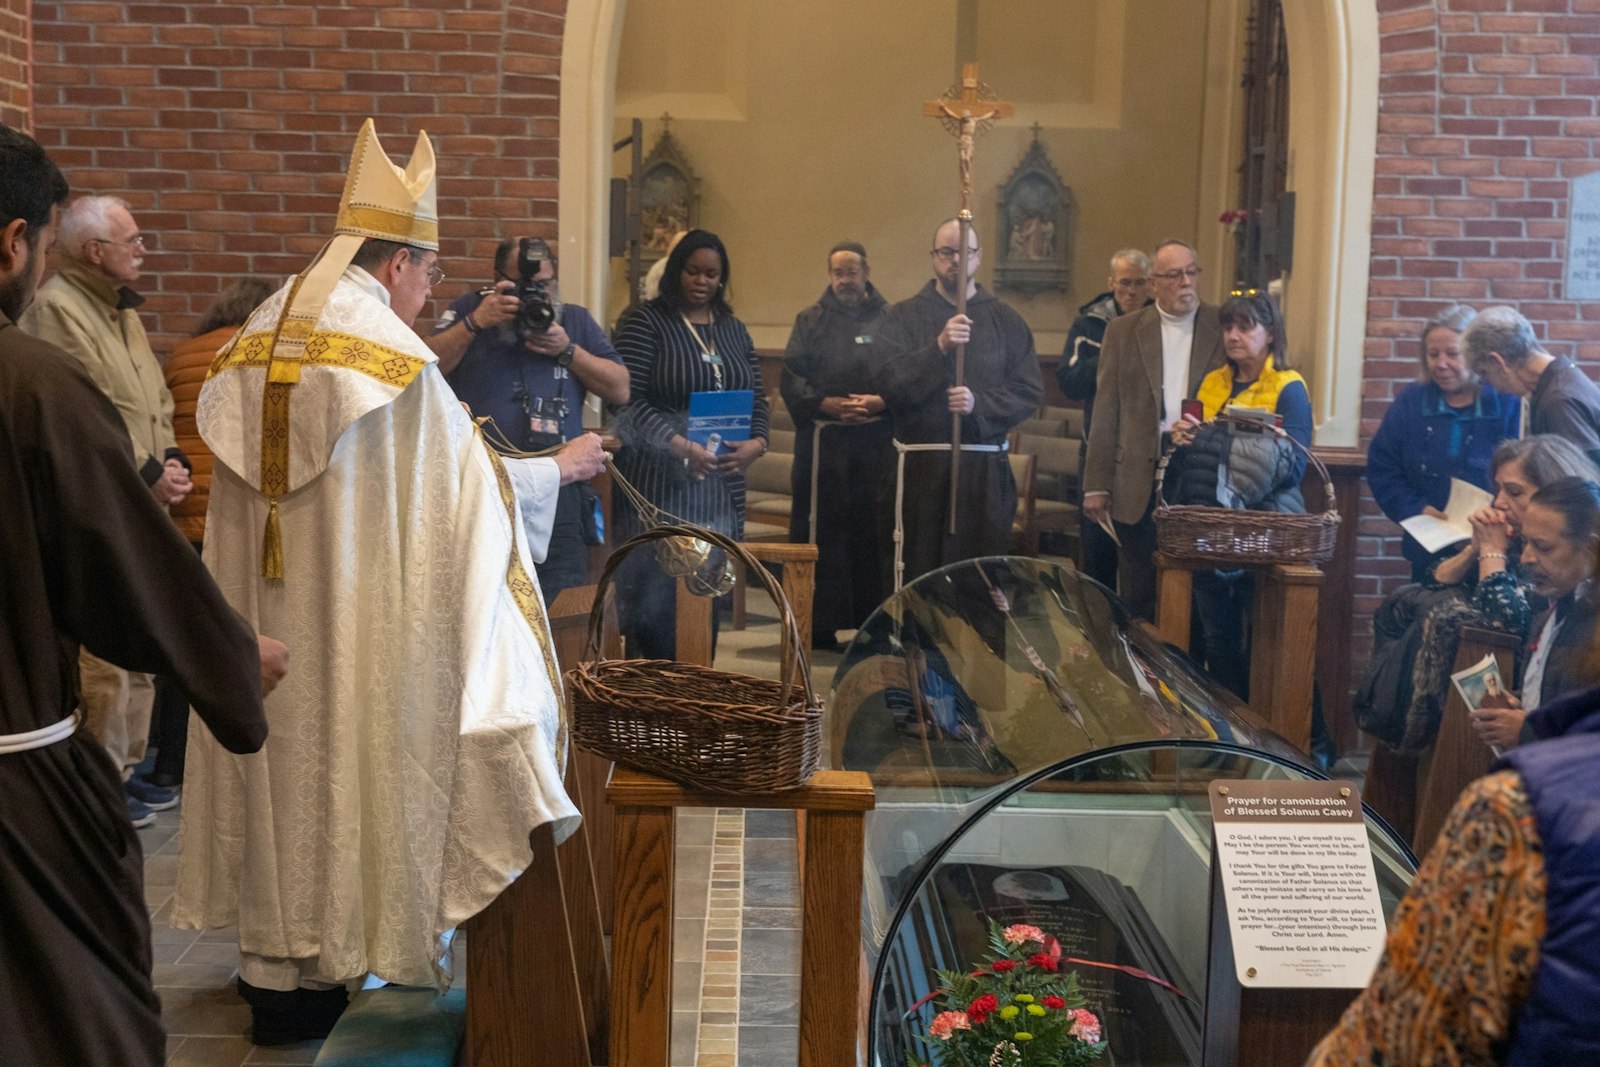 Archbishop Vigneron blesses the tomb of Blessed Solanus Casey during a celebration of the Solanus Casey Center's 20th anniversary Dec. 3.